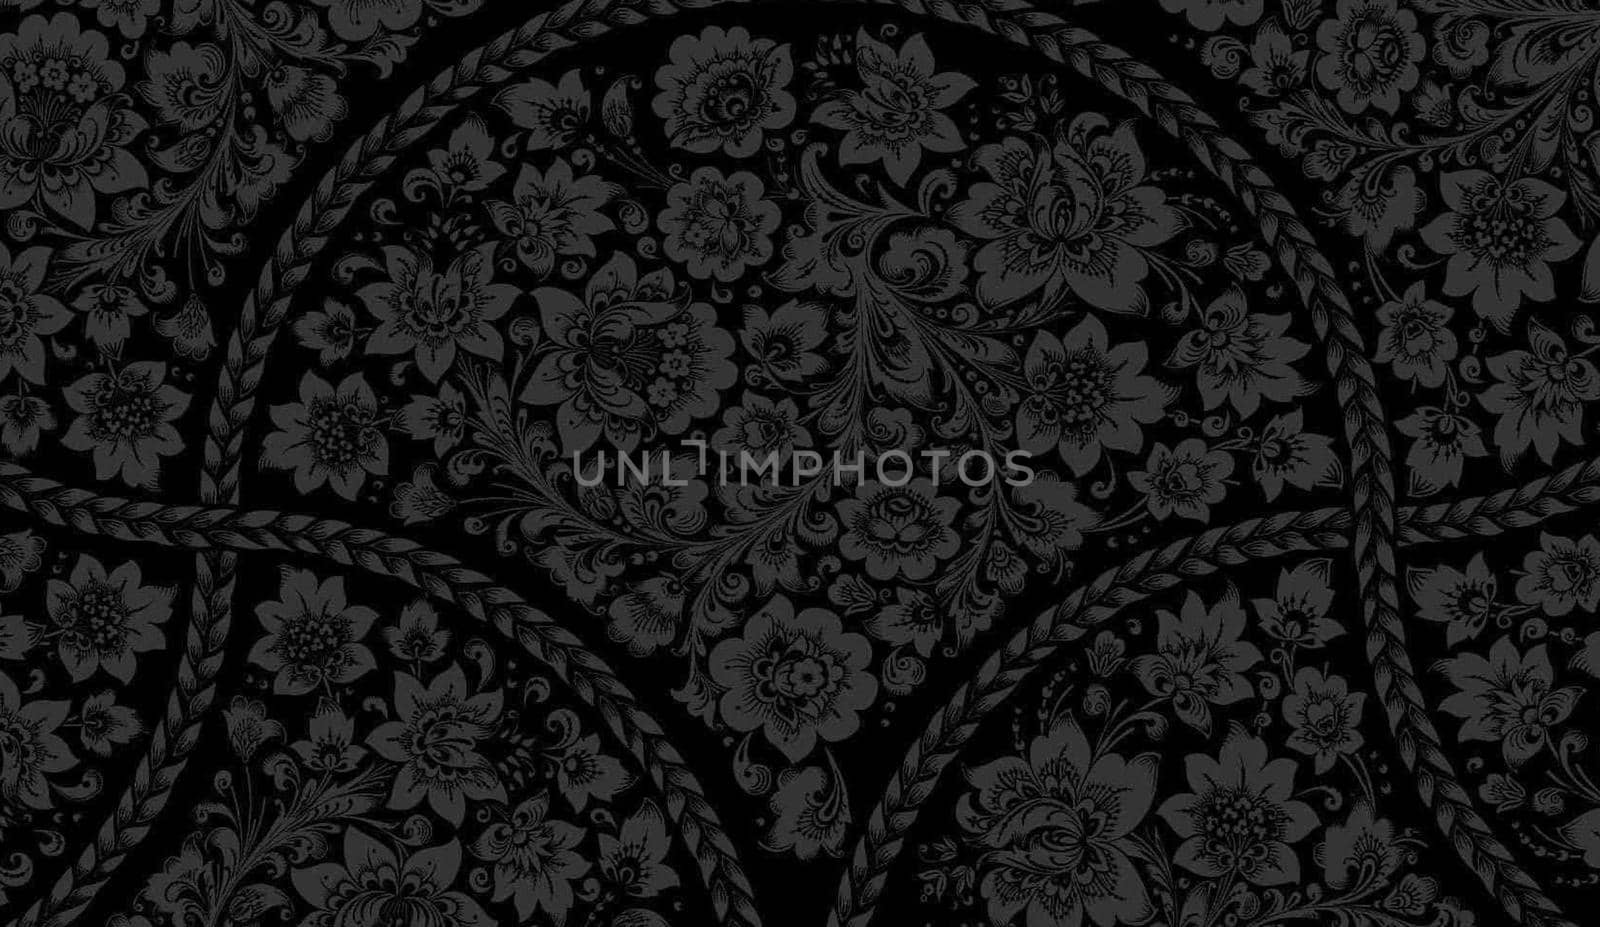 Backgrounds. old style pattern for wallpapers, textile, Scrapbooking etc. by TravelSync27